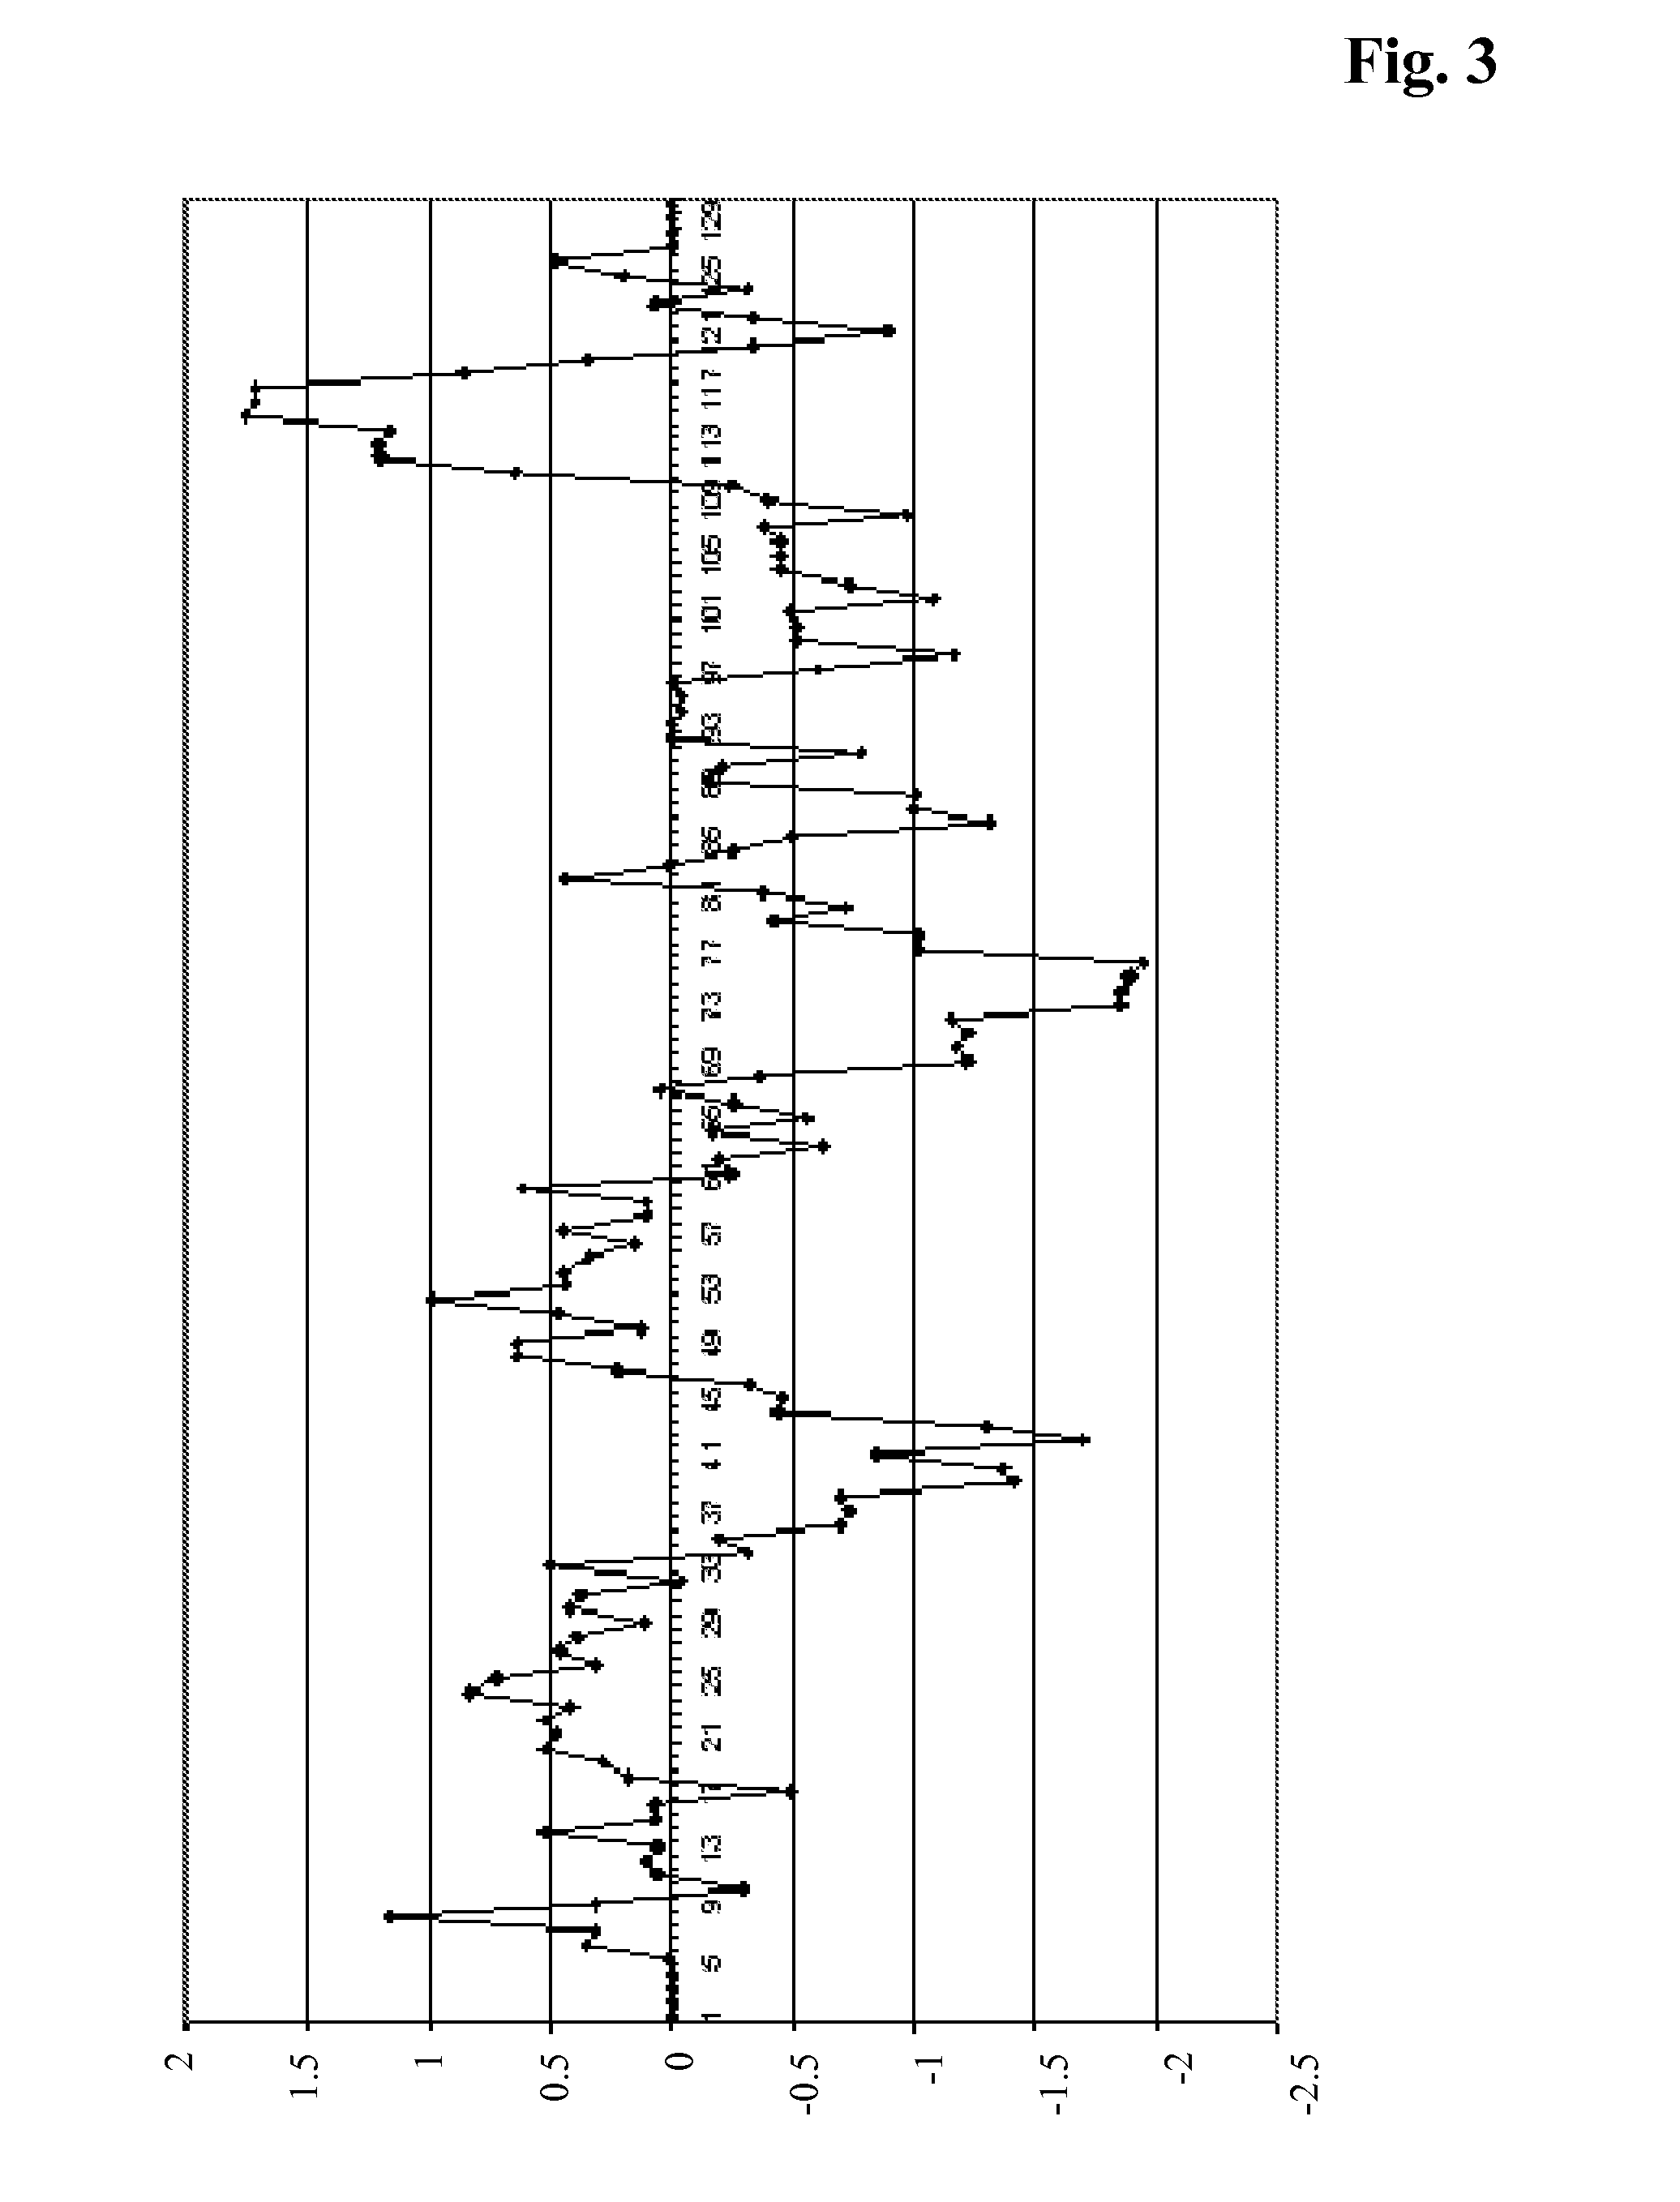 Sequence dependent aggregation